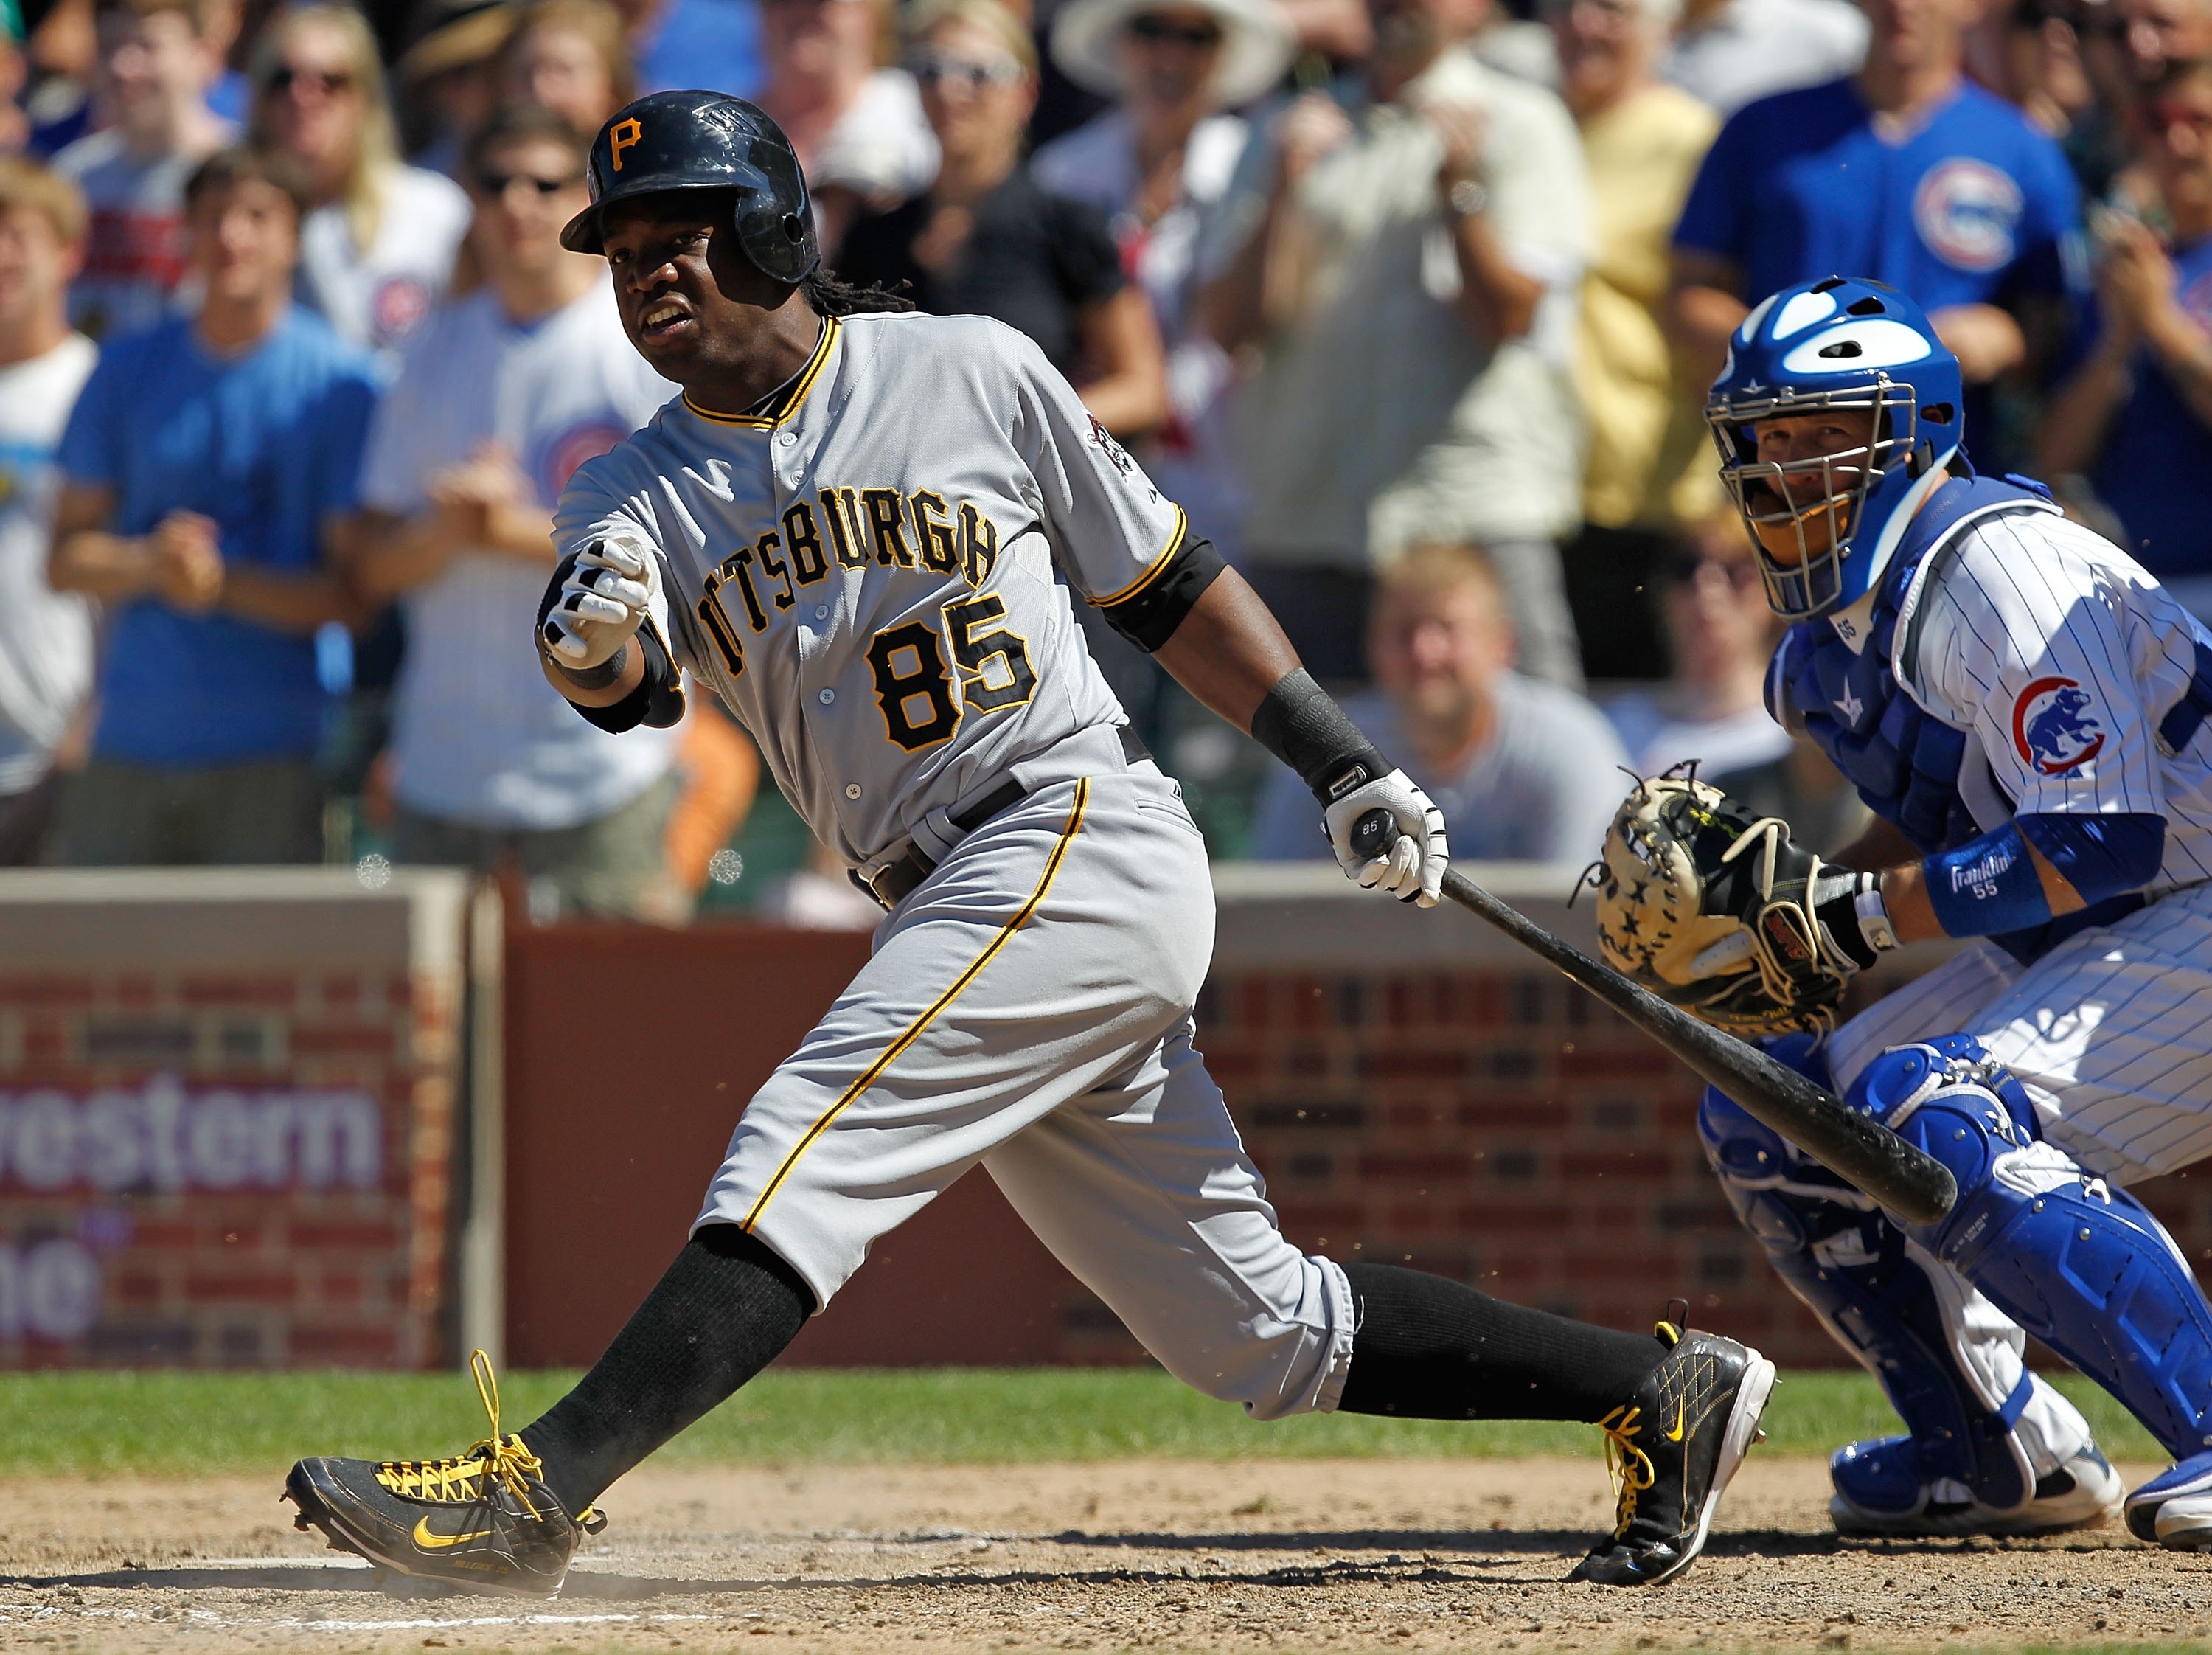 CHICAGO - JUNE 30: Lastings Milledge #85 of the Pittsburgh Pirates hits the ball against the Chicago Cubs at Wrigley Field on June 30, 2010 in Chicago, Illinois. The Pirates defeated the Cubs 2-0. (Photo by Jonathan Daniel/Getty Images)